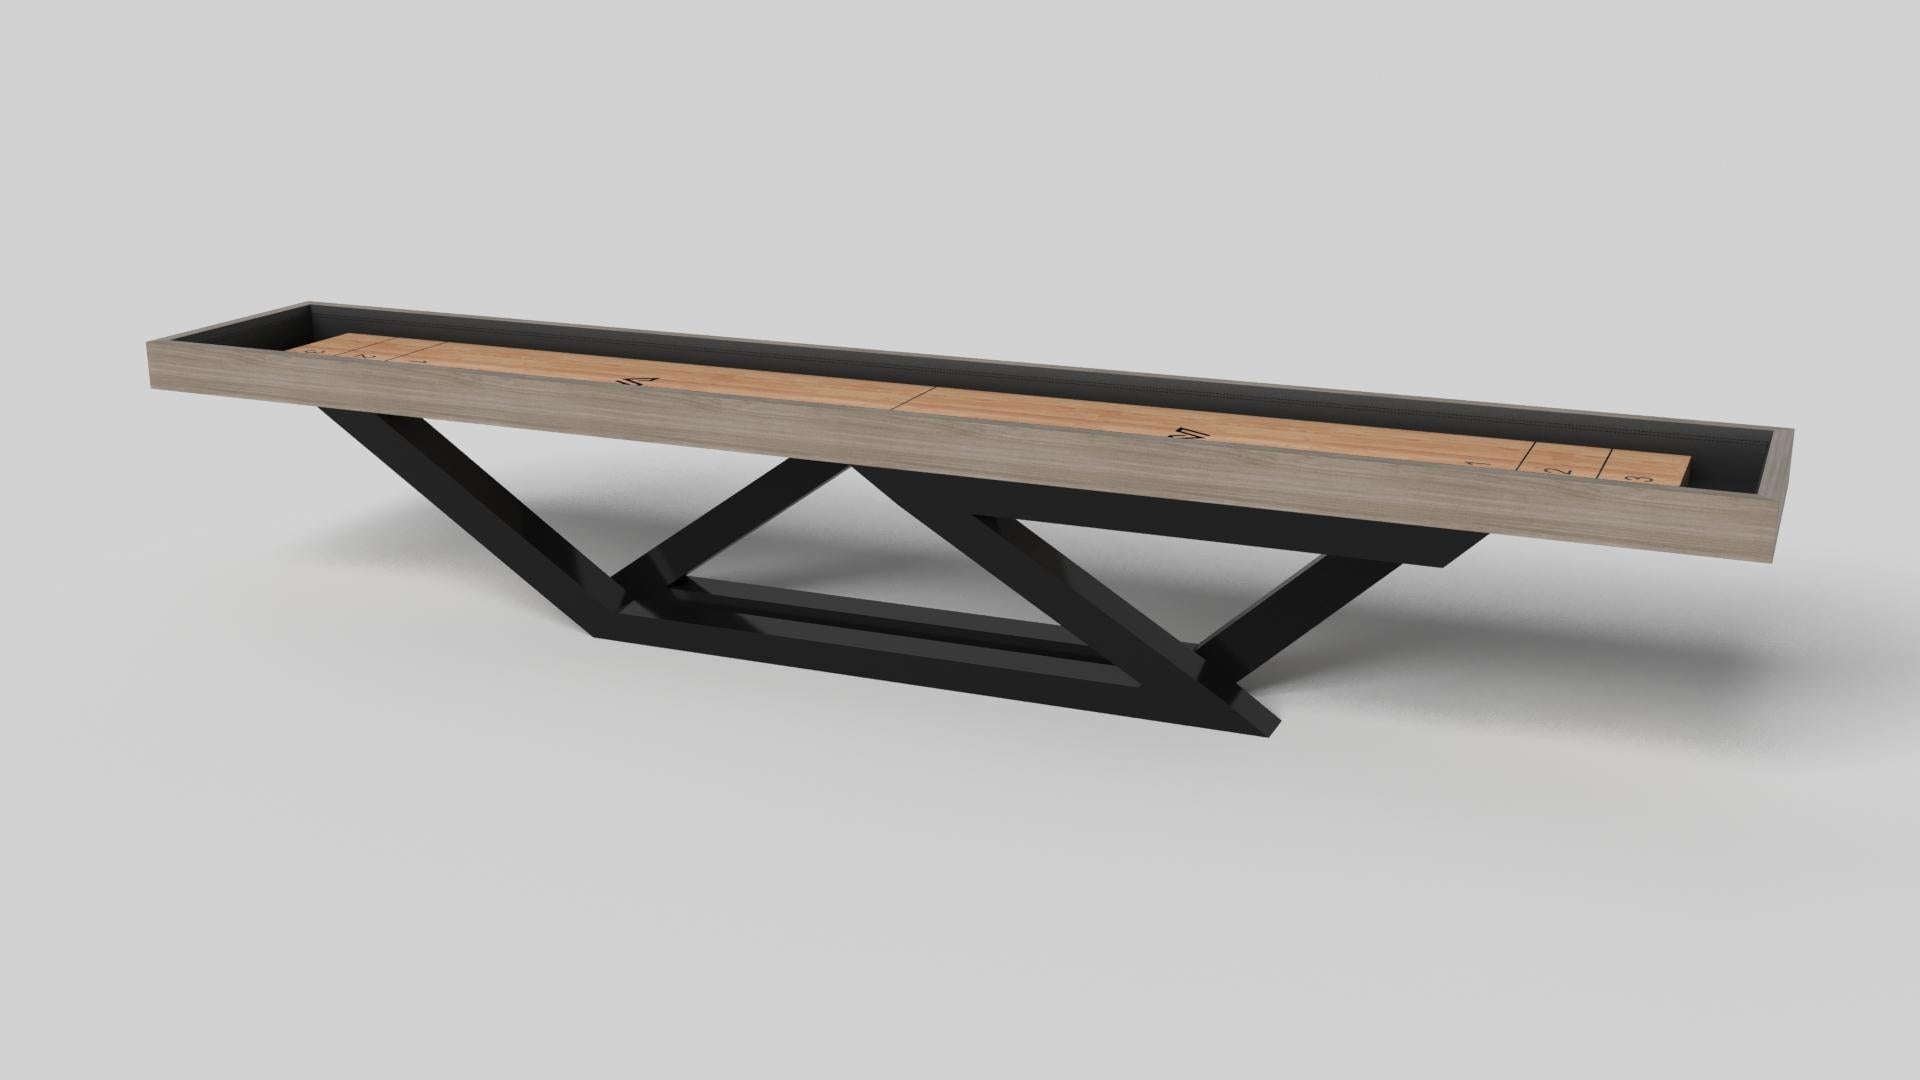 A contemporary composition of clean lines and sleek edges, the Trinity shuffleboard table in black chrome with red accent is an elegant expression of modern design. Handcrafted and detailed with a regulation top for professional game play, this